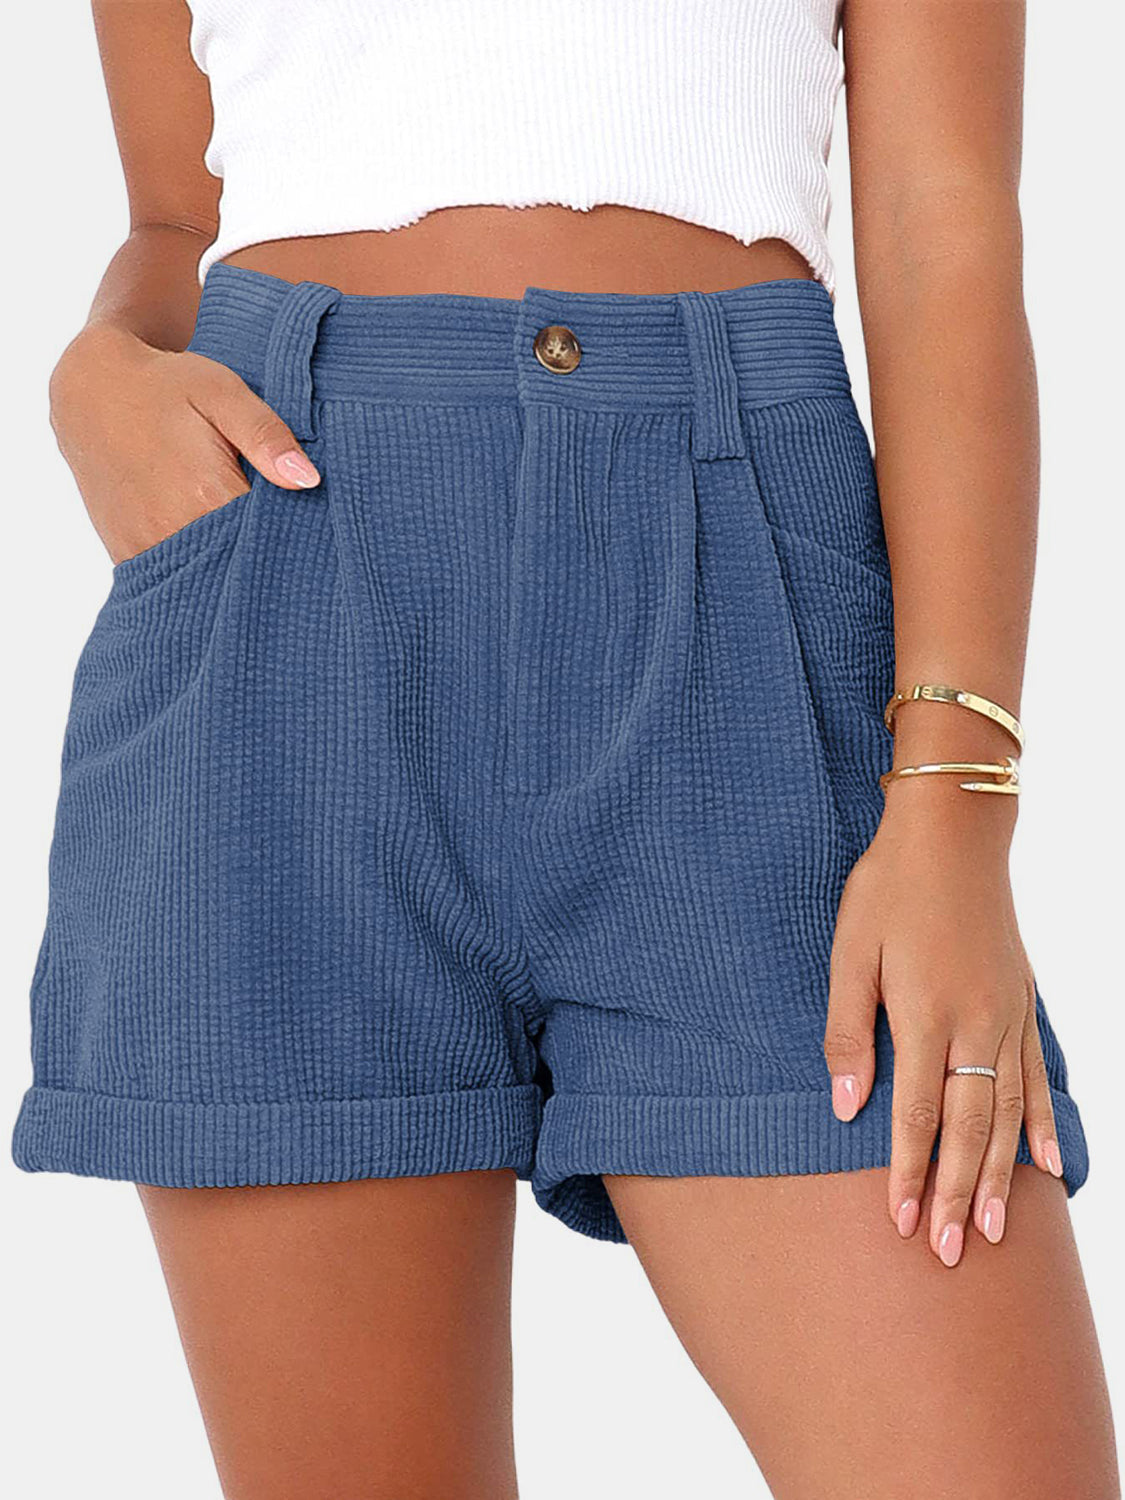 Full Size High Waist Shorts with Pockets